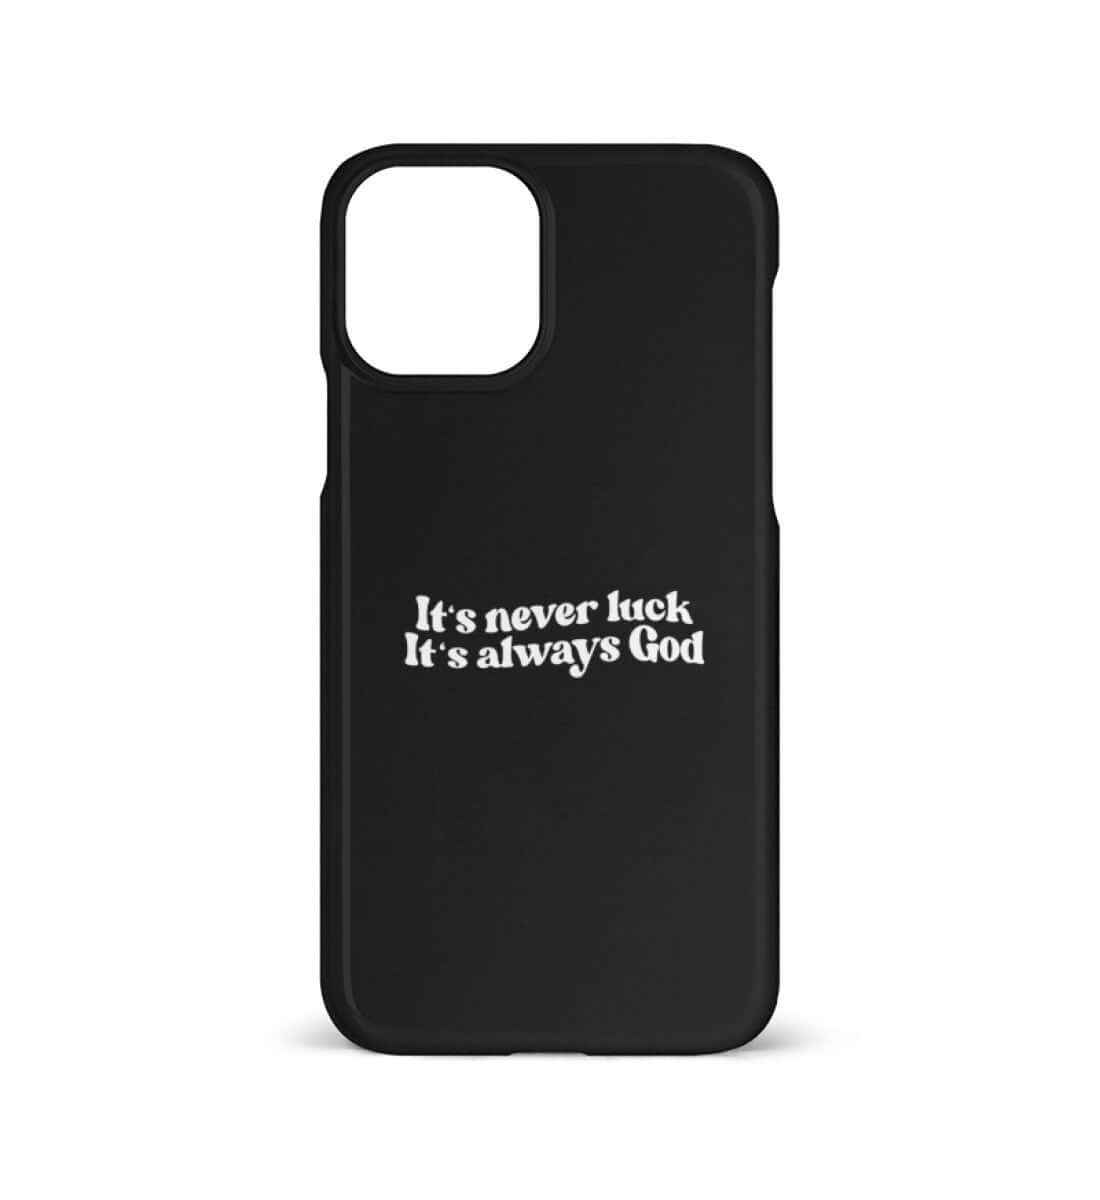 'IT'S NEVER LUCK IT'S ALWAYS GOD' - iPhone 11ProMax Handyhülle - GODVIBES